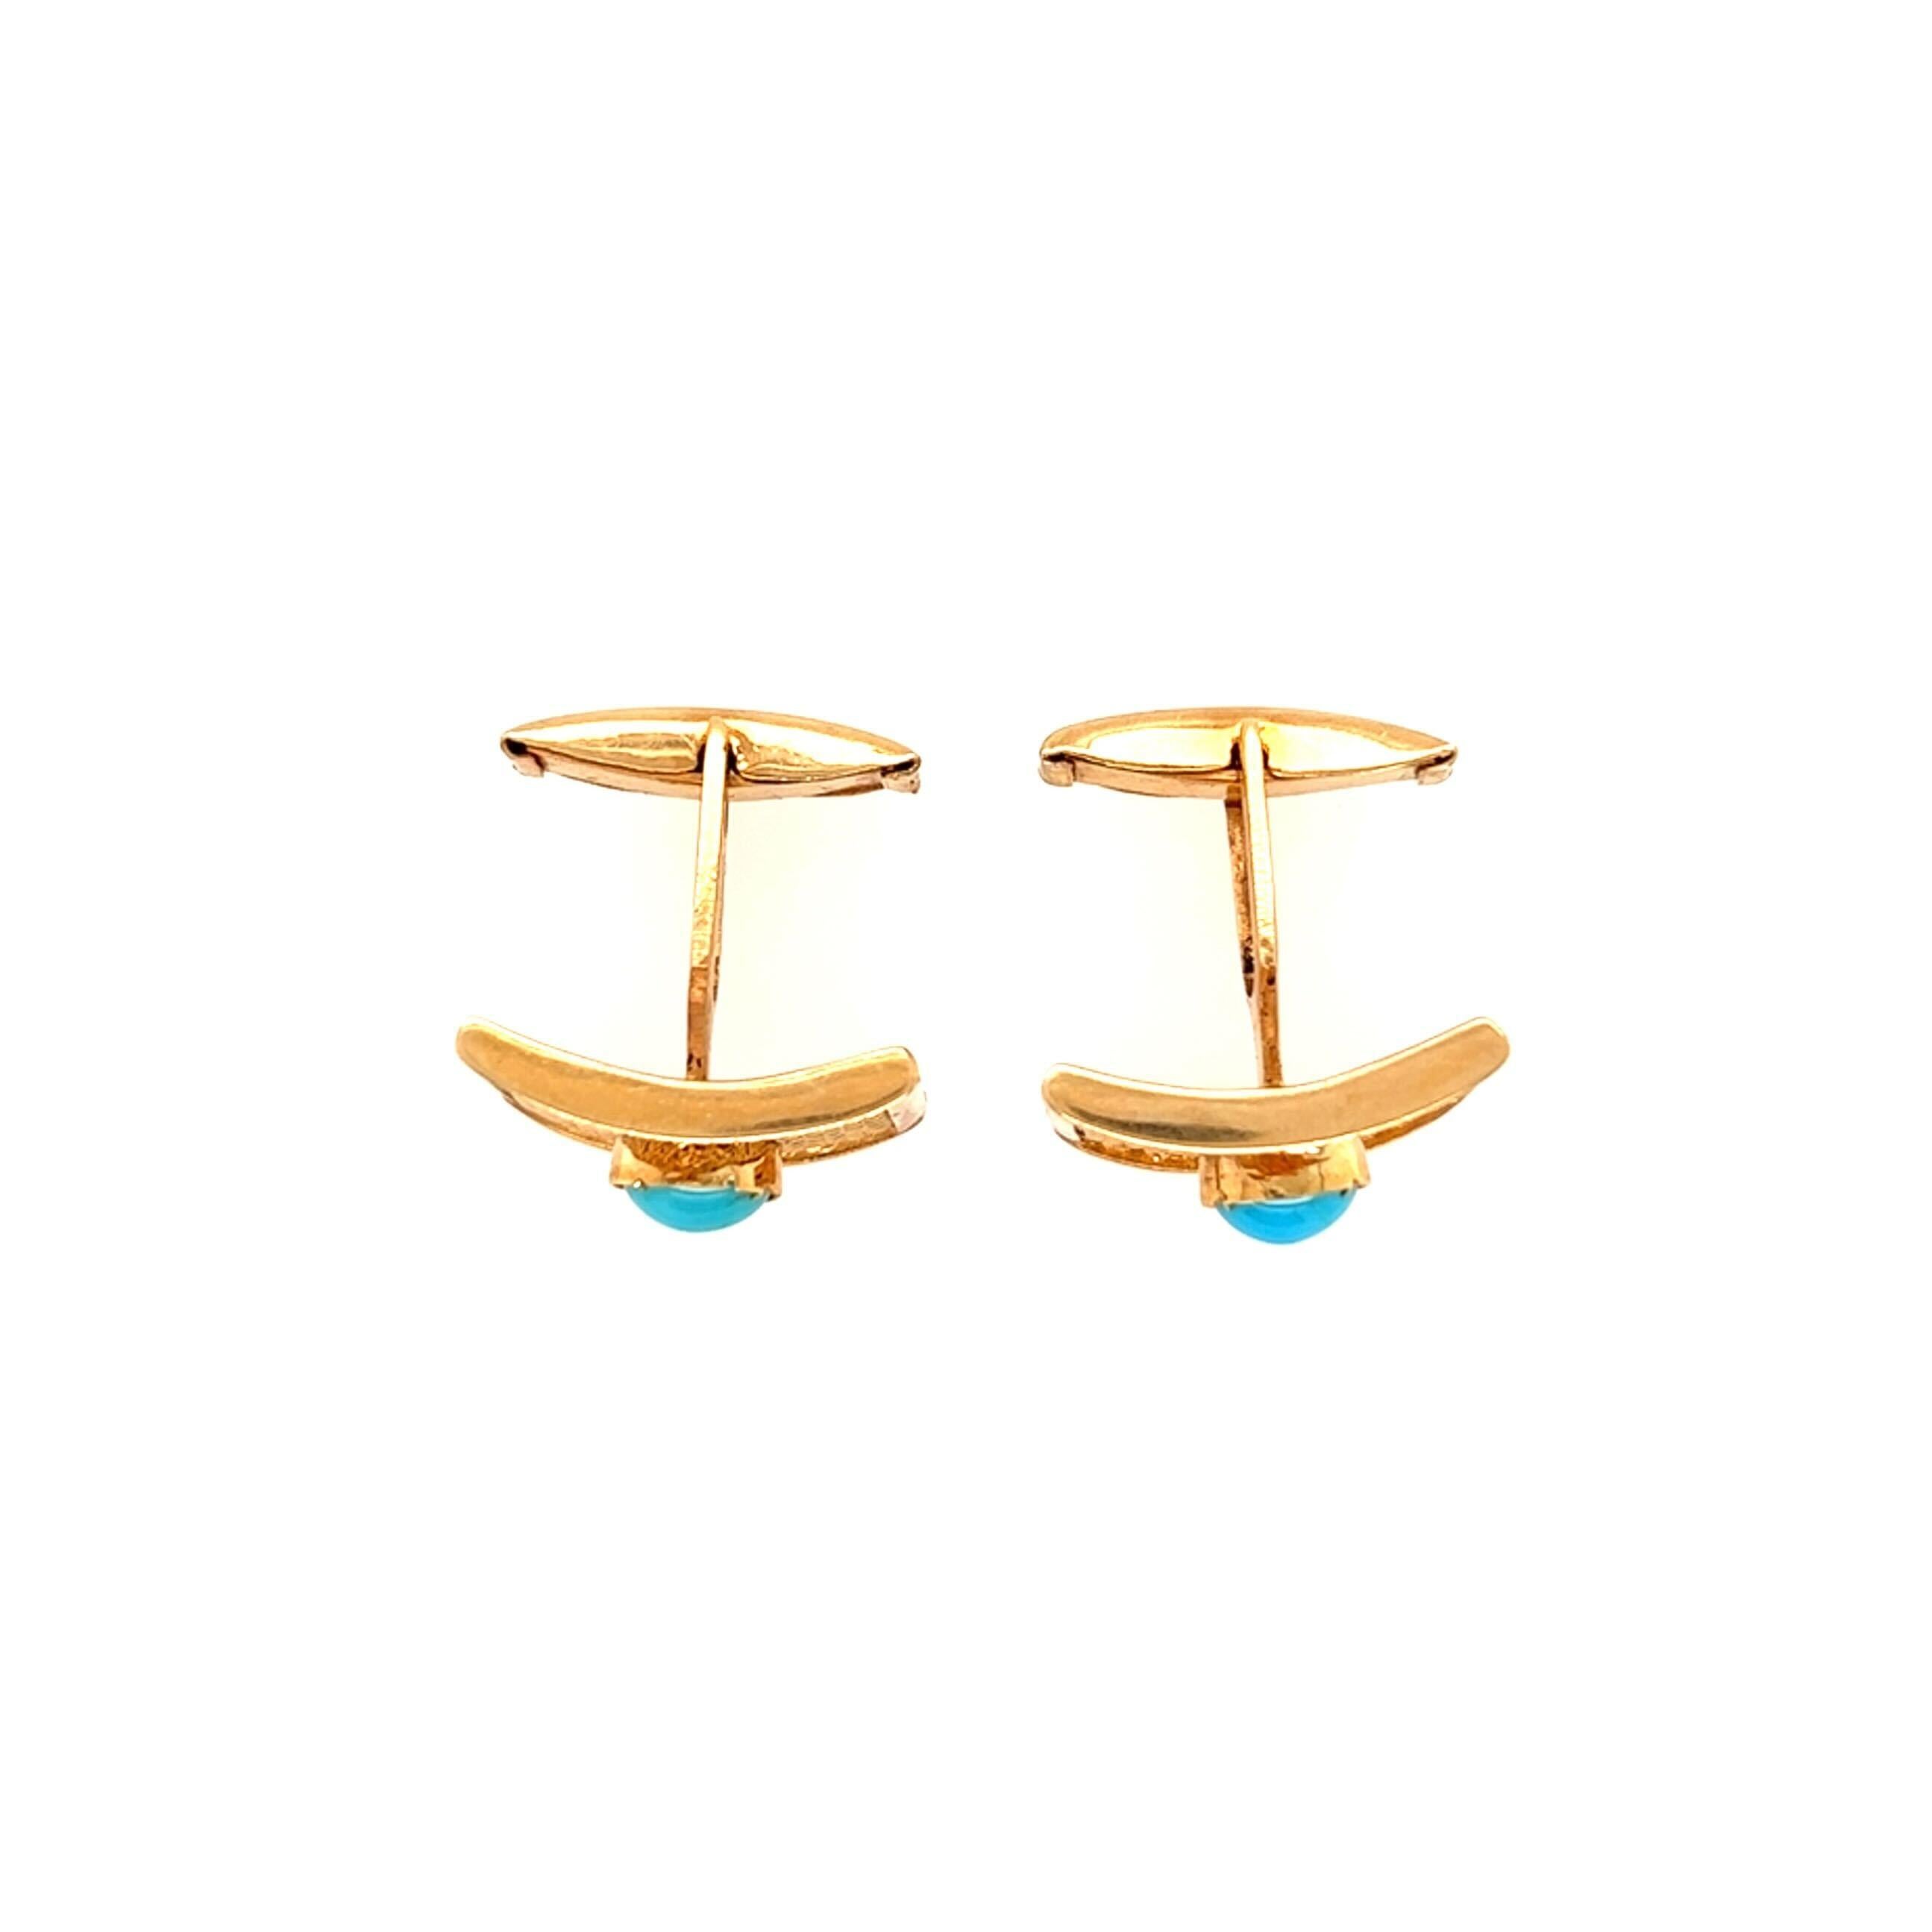 A pair of 18 karat yellow gold and turquoise cufflinks with swivel links. Circa 1970.  A 6x4mm turquoise cabochon is centered in a curved rectangular yellow gold woven mesh gold link within a gold frame.  Each link measures 20 x 14 mm.  Gross weight